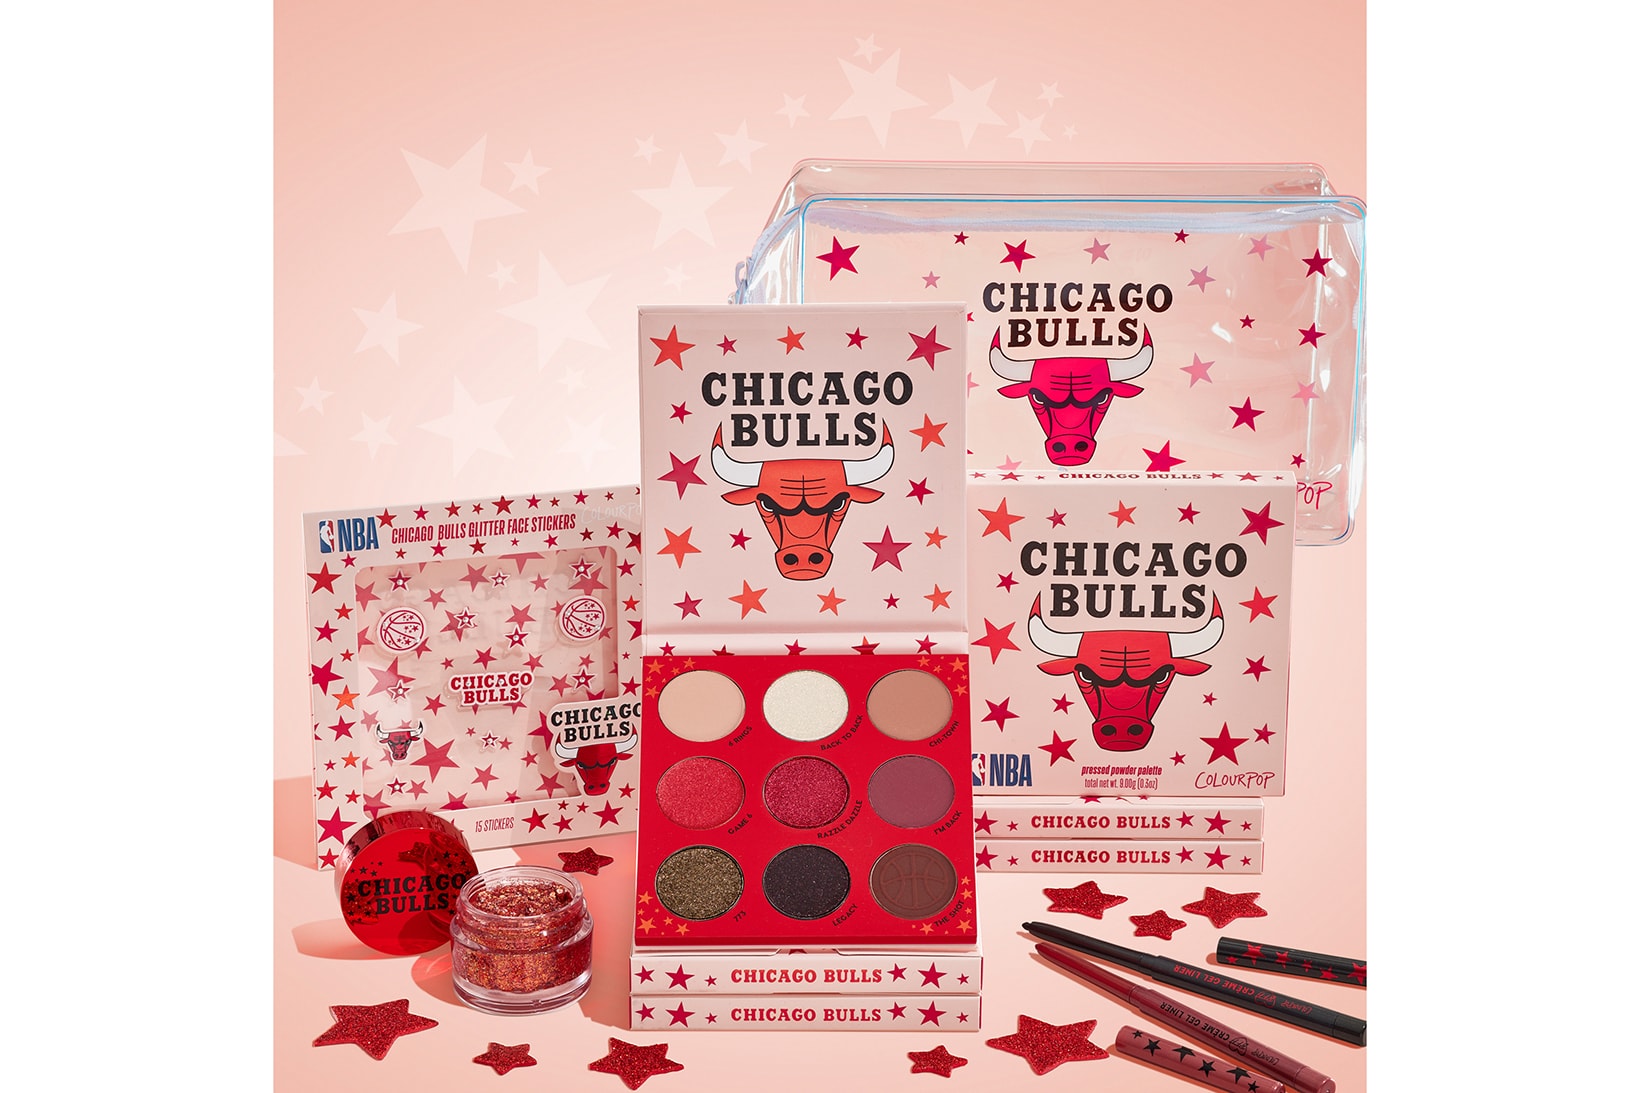 Eyeliners Bags Face Gels Stickers NBA ColourPop Cosmetics Makeup Collection Collaboration Beauty Eyeshadow Palettes Chicago Bulls